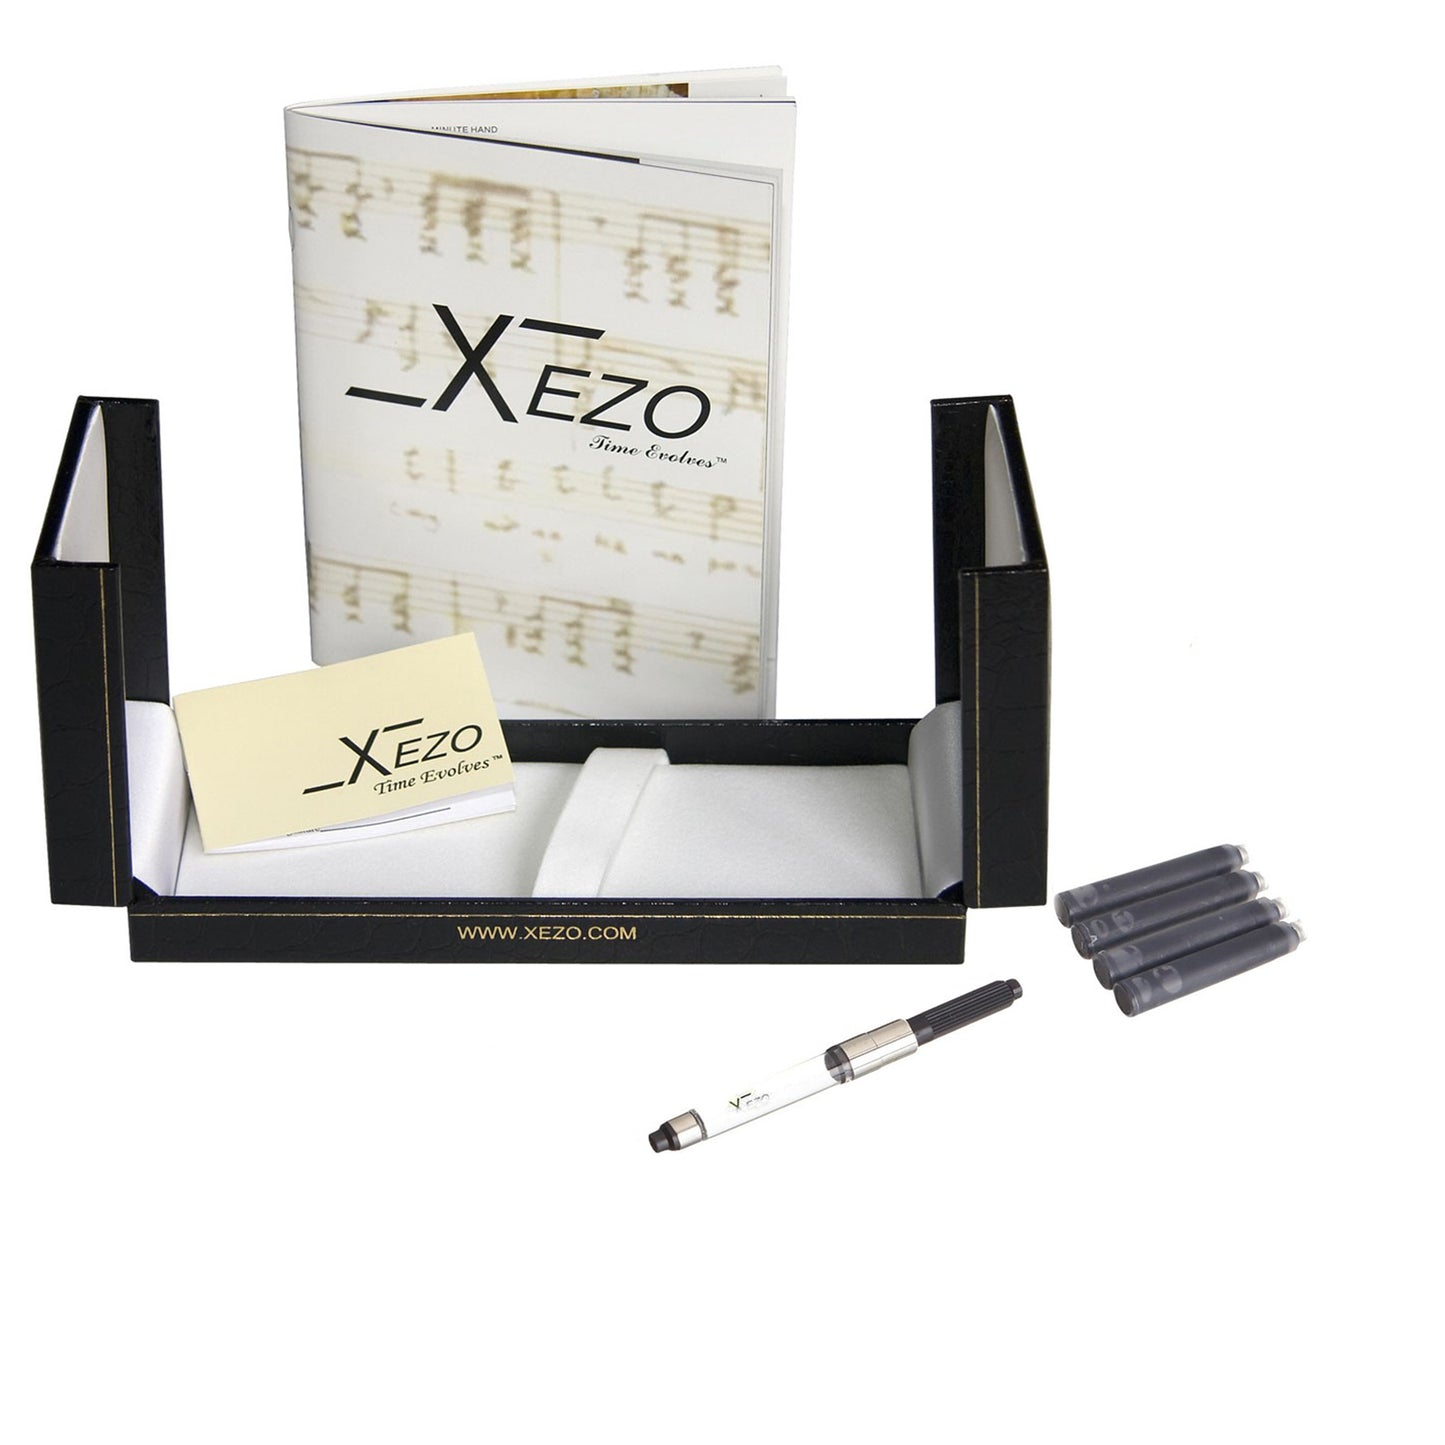 Xezo - Black gift box, certificate, manual, chrome-plated ink converter, and four ink cartridges of the O Sole Mio F fountain pen